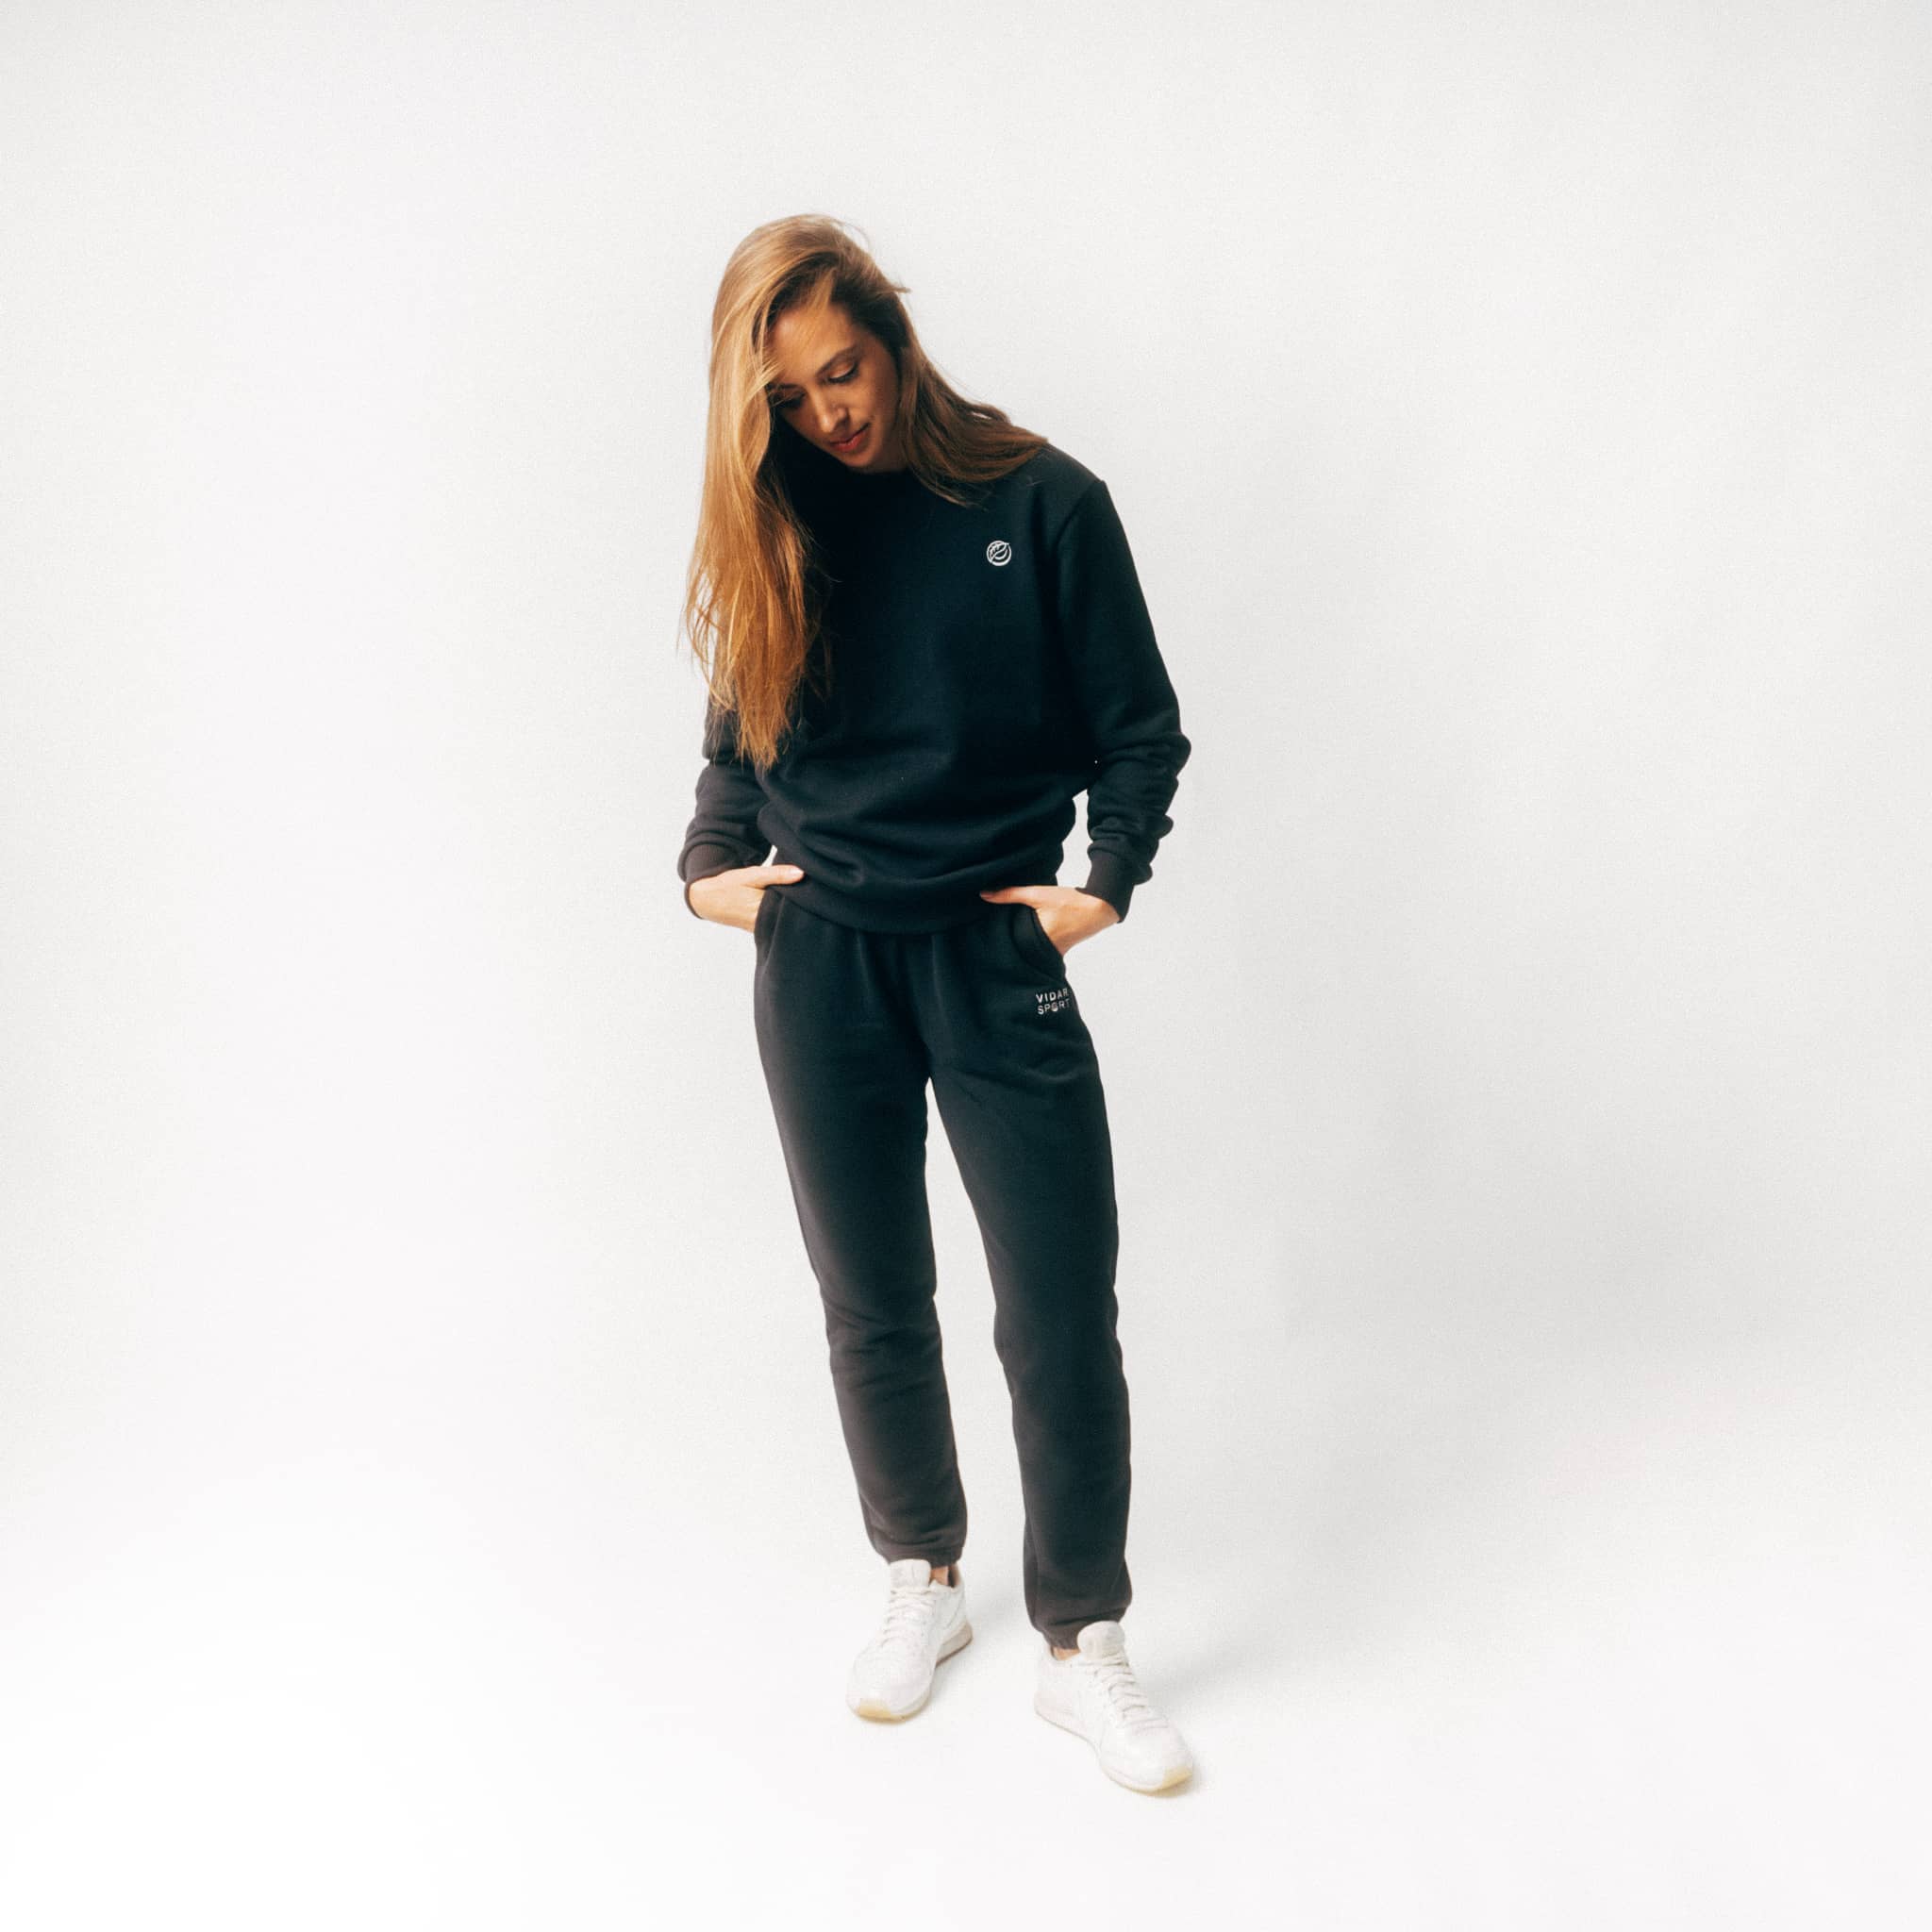 ALL COURT I Natural Sweatpants aus recycelter Baumwolle